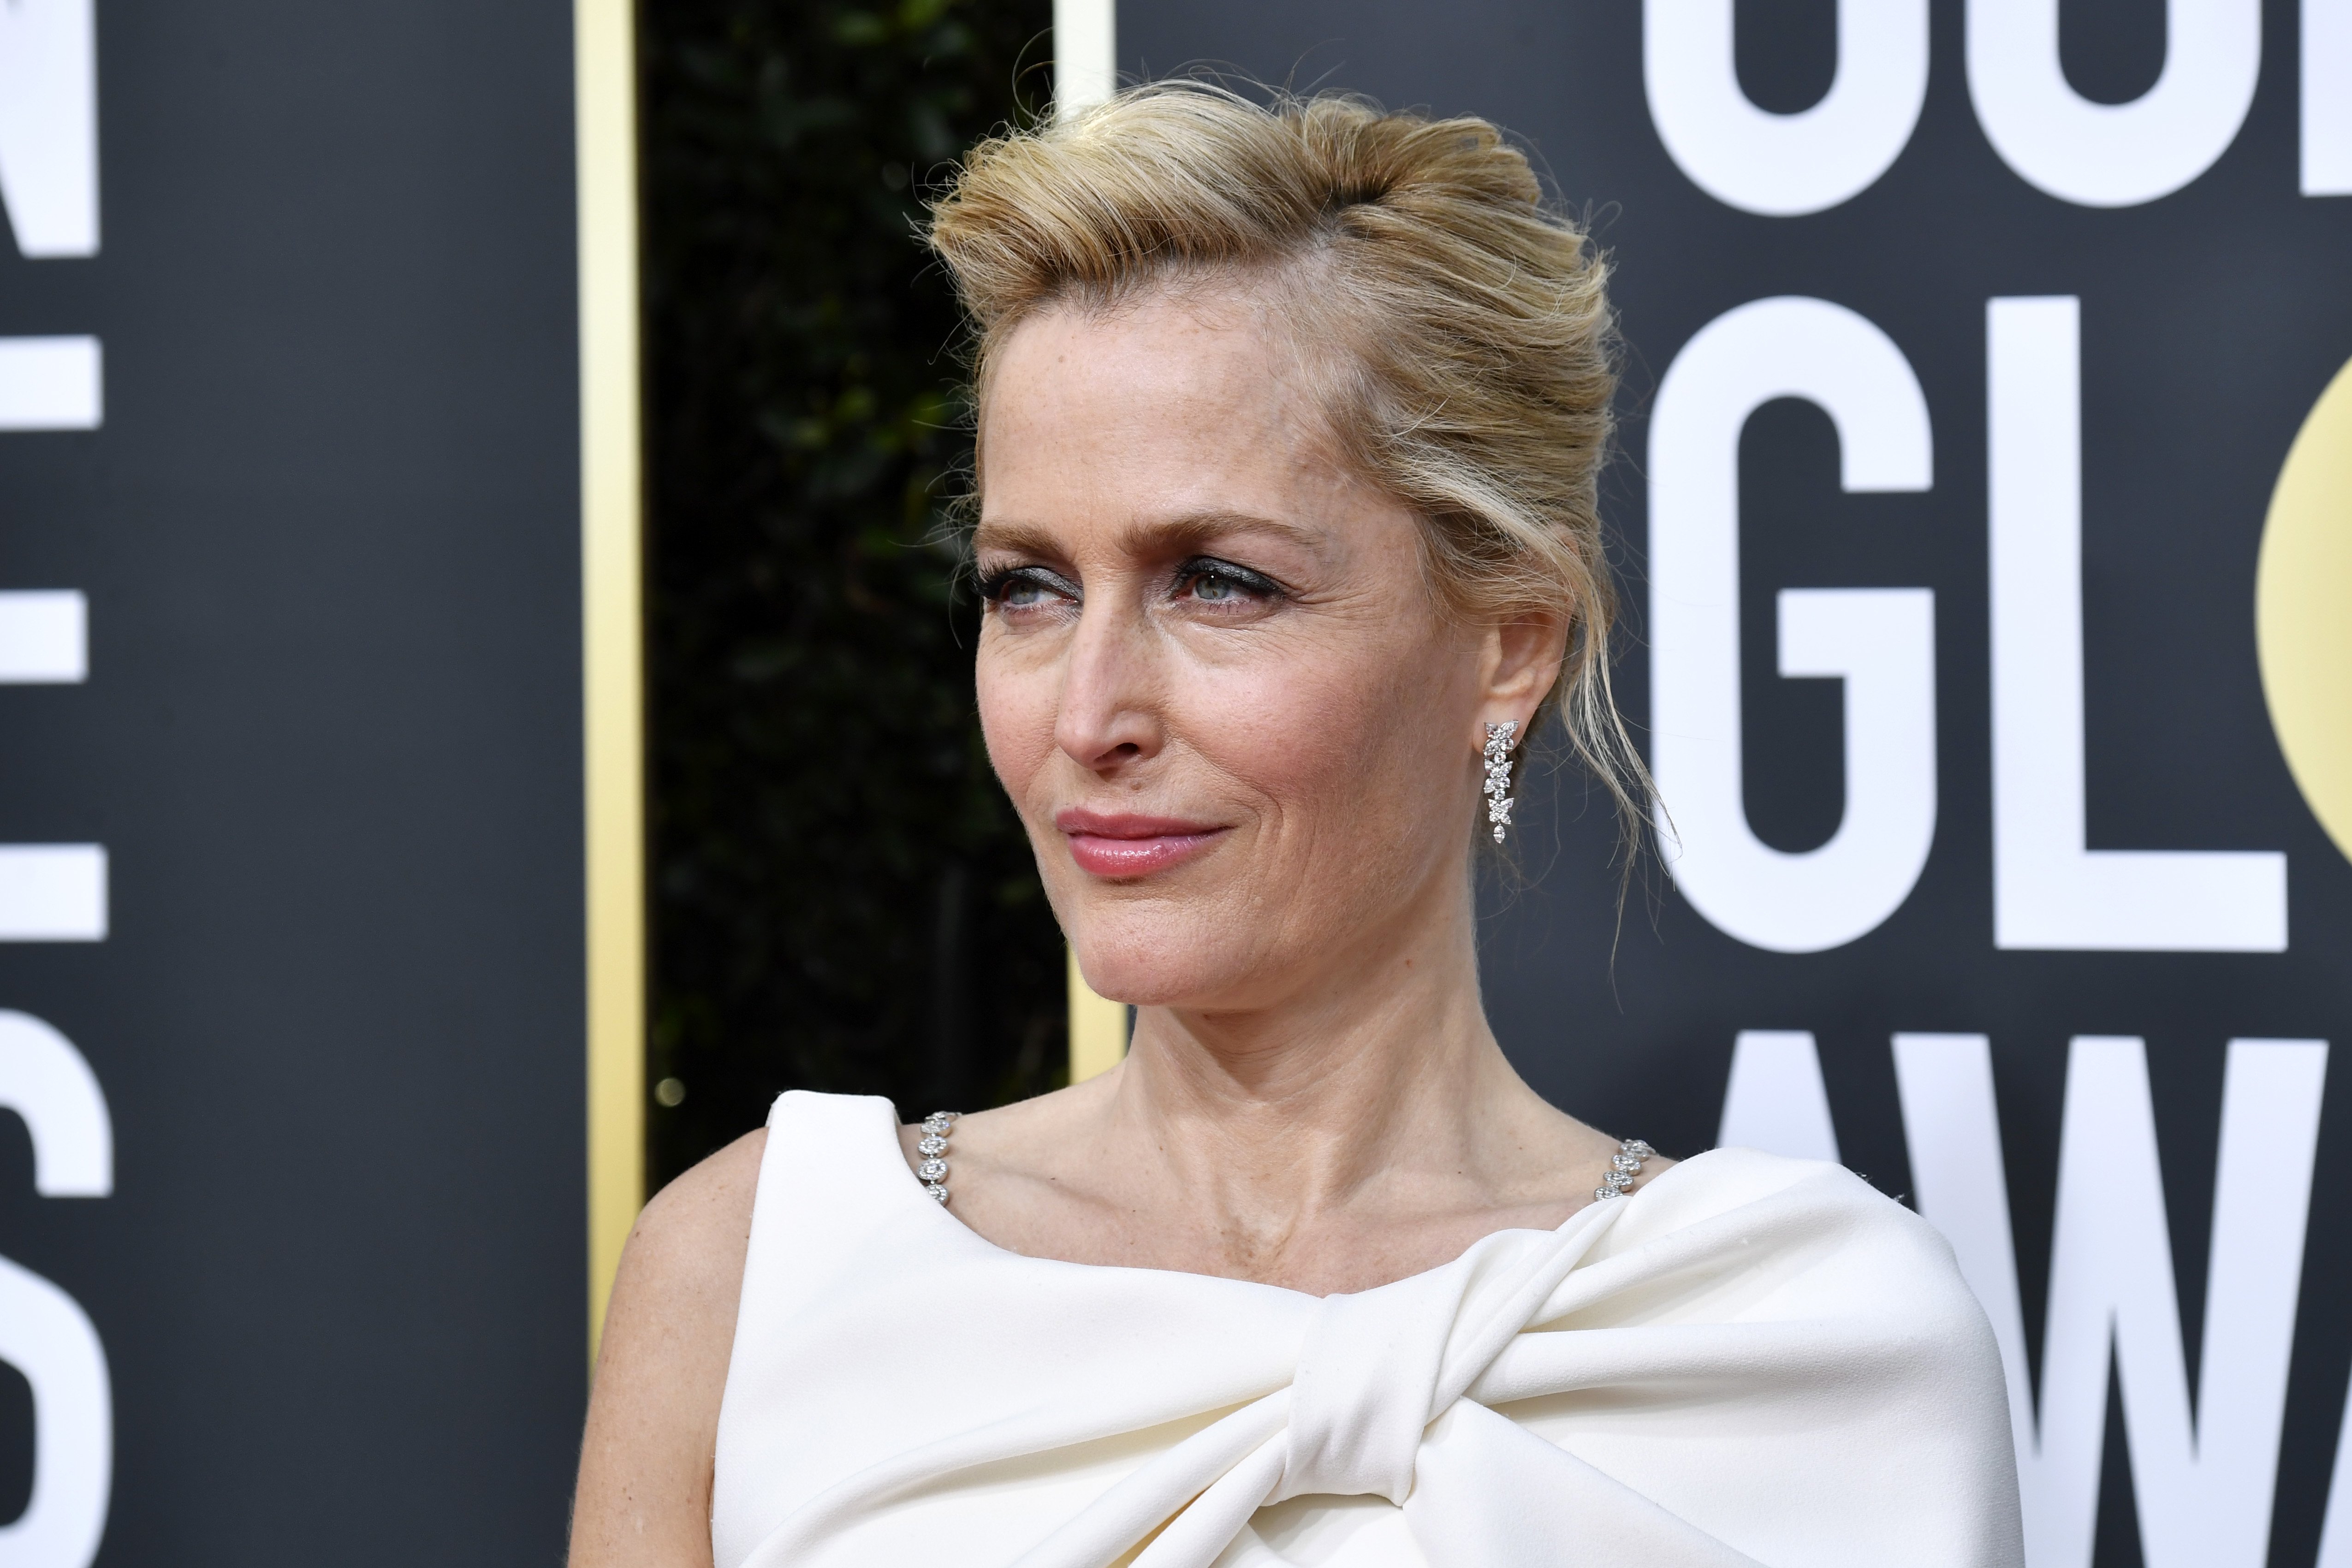 Gillian Anderson attends the 77th Annual Golden Globe Awards at The Beverly Hilton Hotel on January 05, 2020 in Beverly Hills, California | Photo: Getty Images